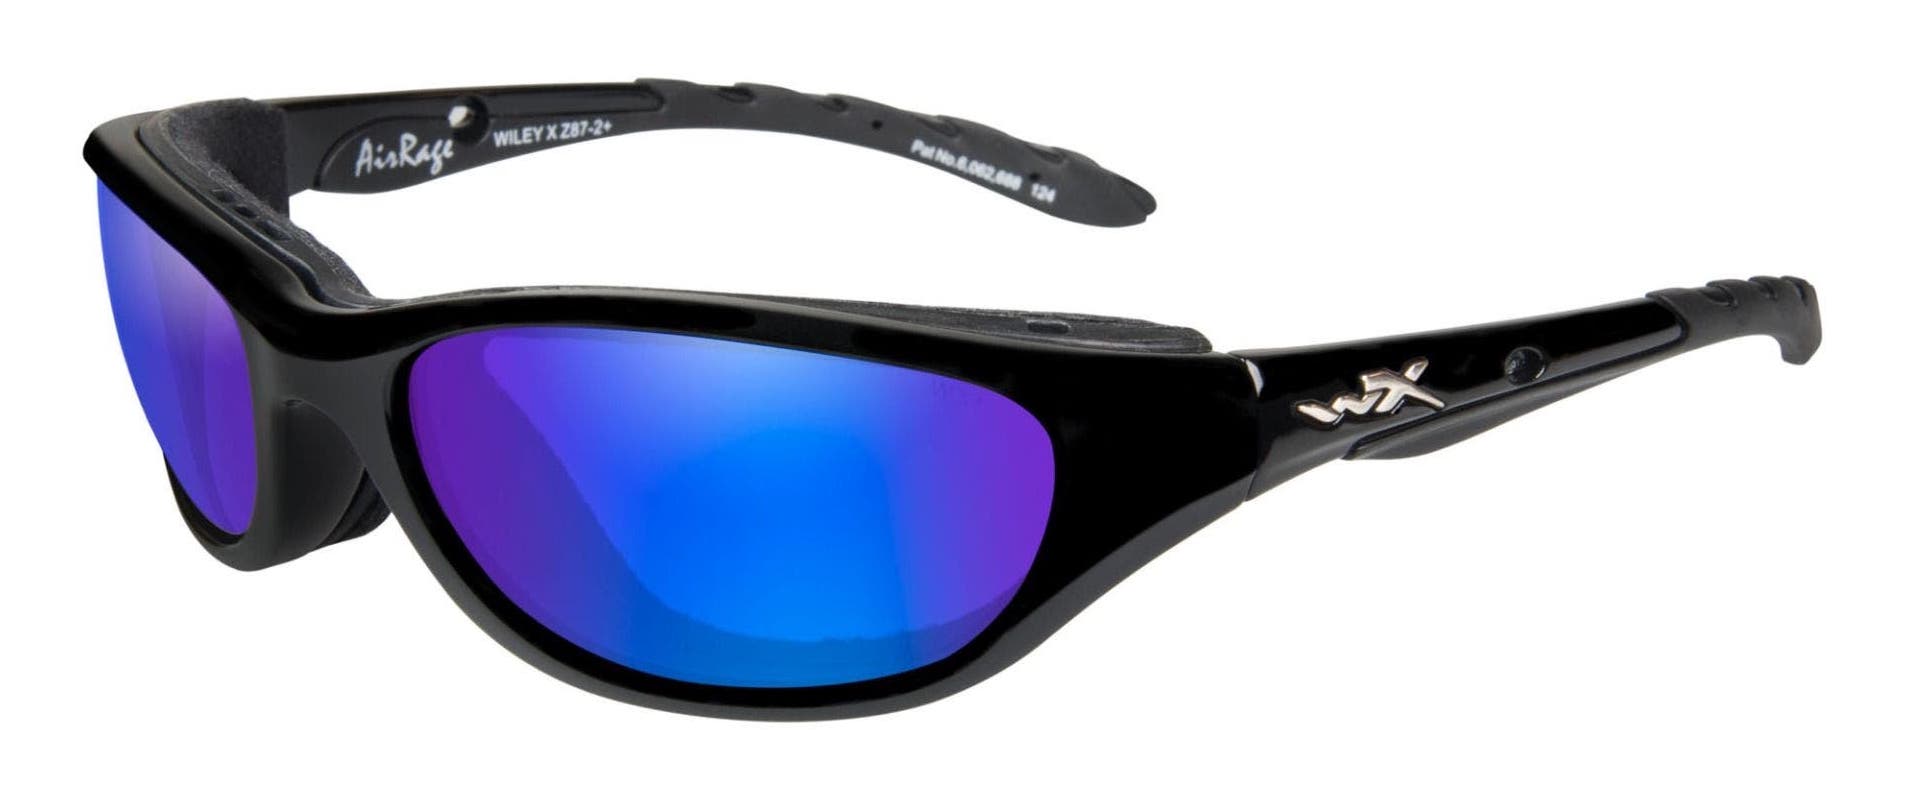 Wiley X Airrage motorcycle glasses for small faces. Glossy black frame with polarized blue mirror lenses.